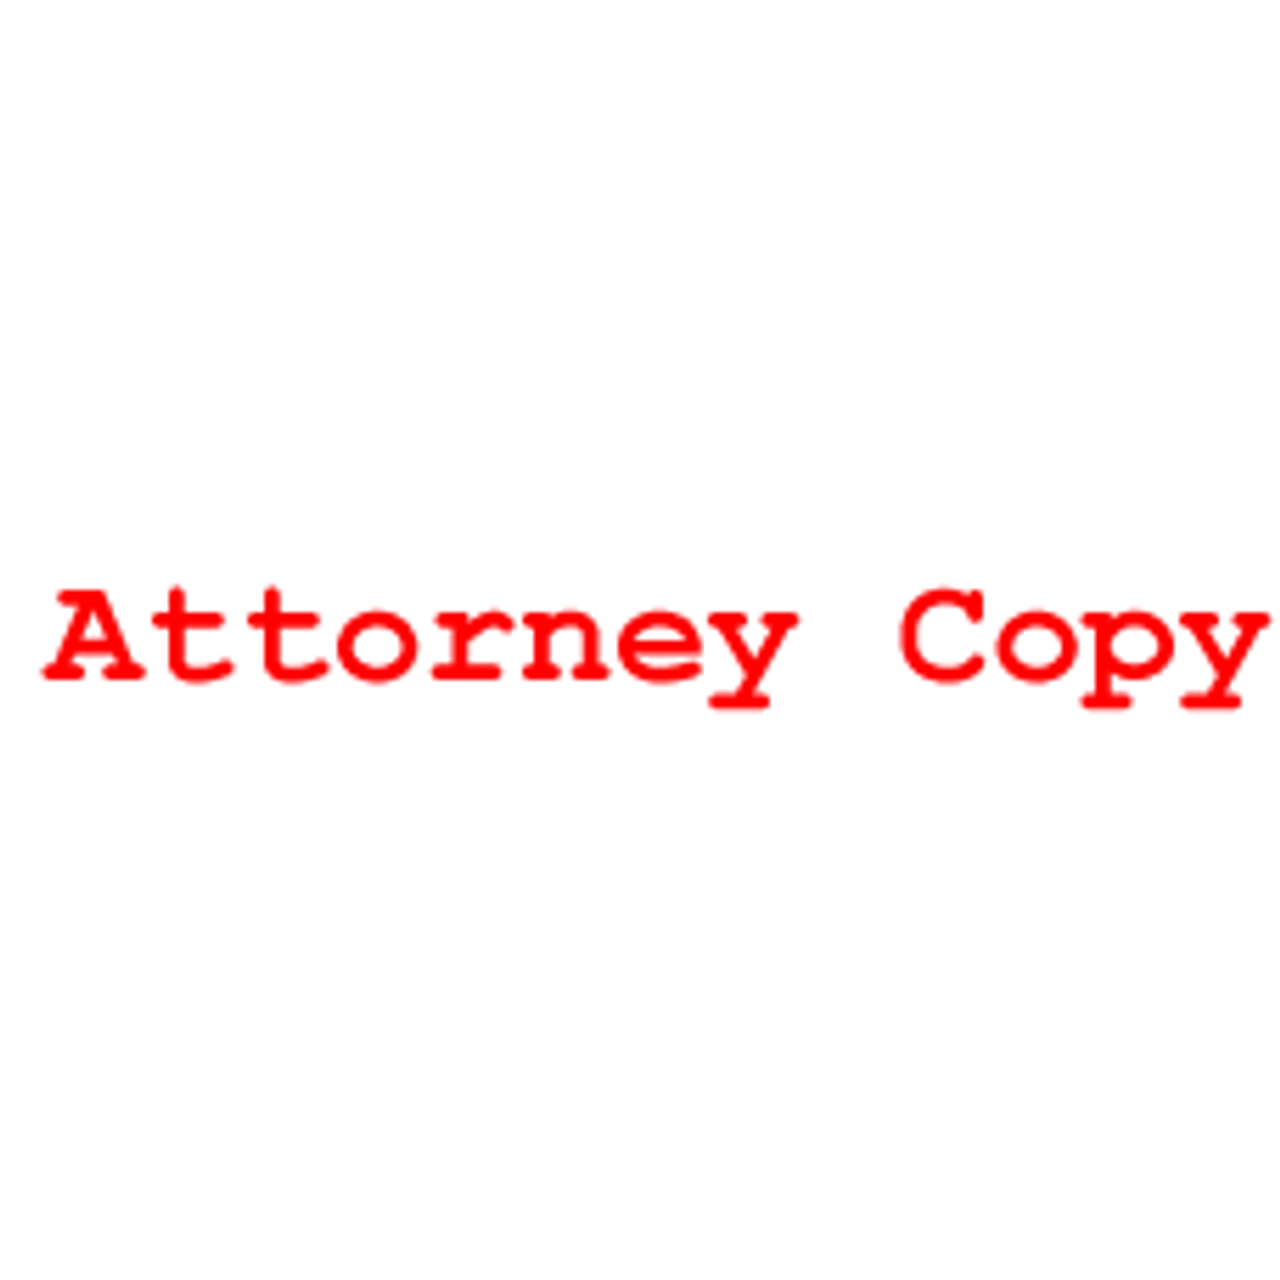 ATTORNEY COPY Rubber Stamp for office use self-inking